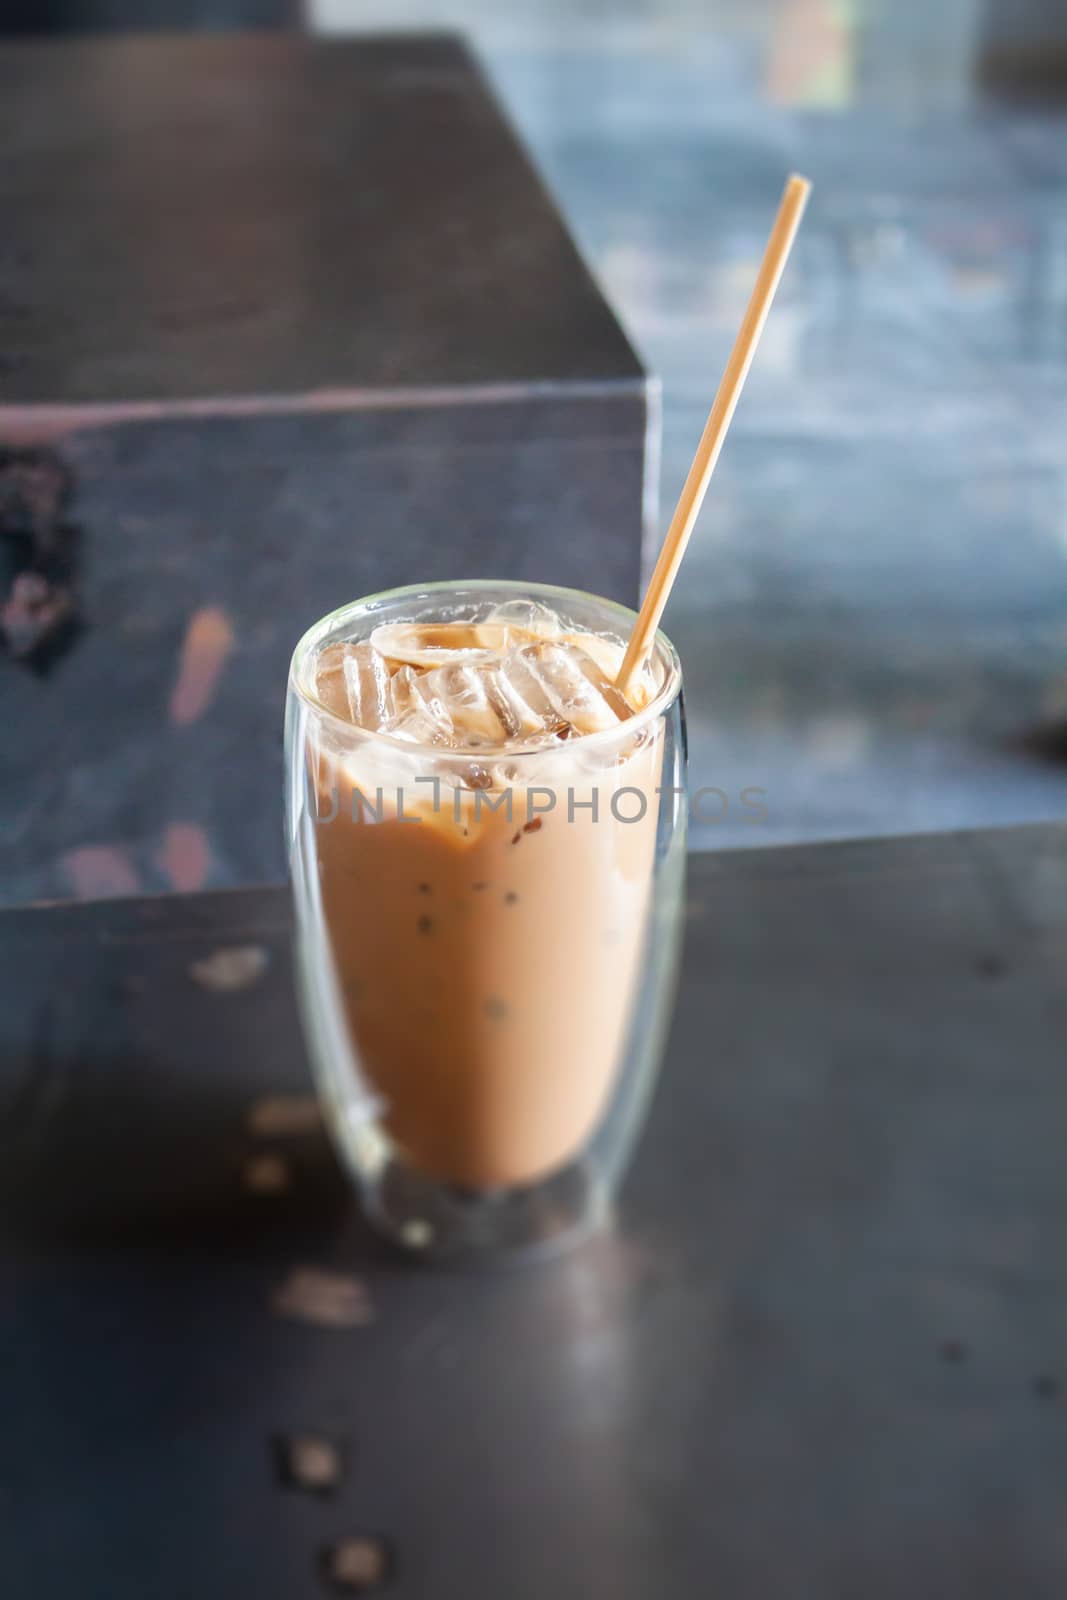 Iced coffee in coffee shop on wooden table, stock photo